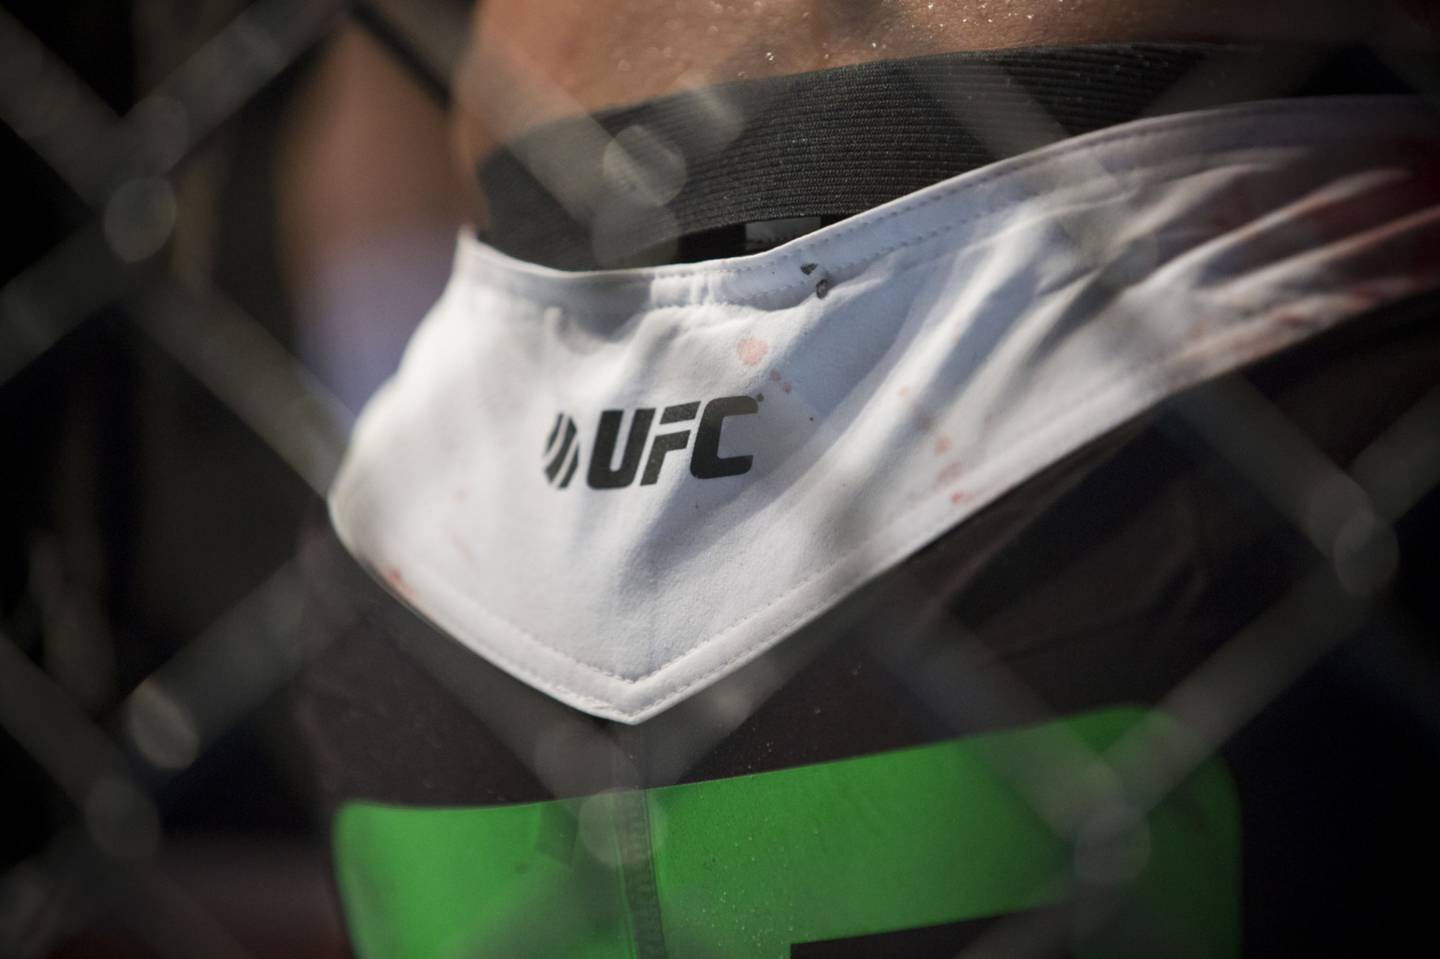 The Ultimate Fighting Championship (UFC) logo is displayed on a fighter's shorts during UFC Fight Night at Cotai Arena, inside the Venetian Macao resort and casino